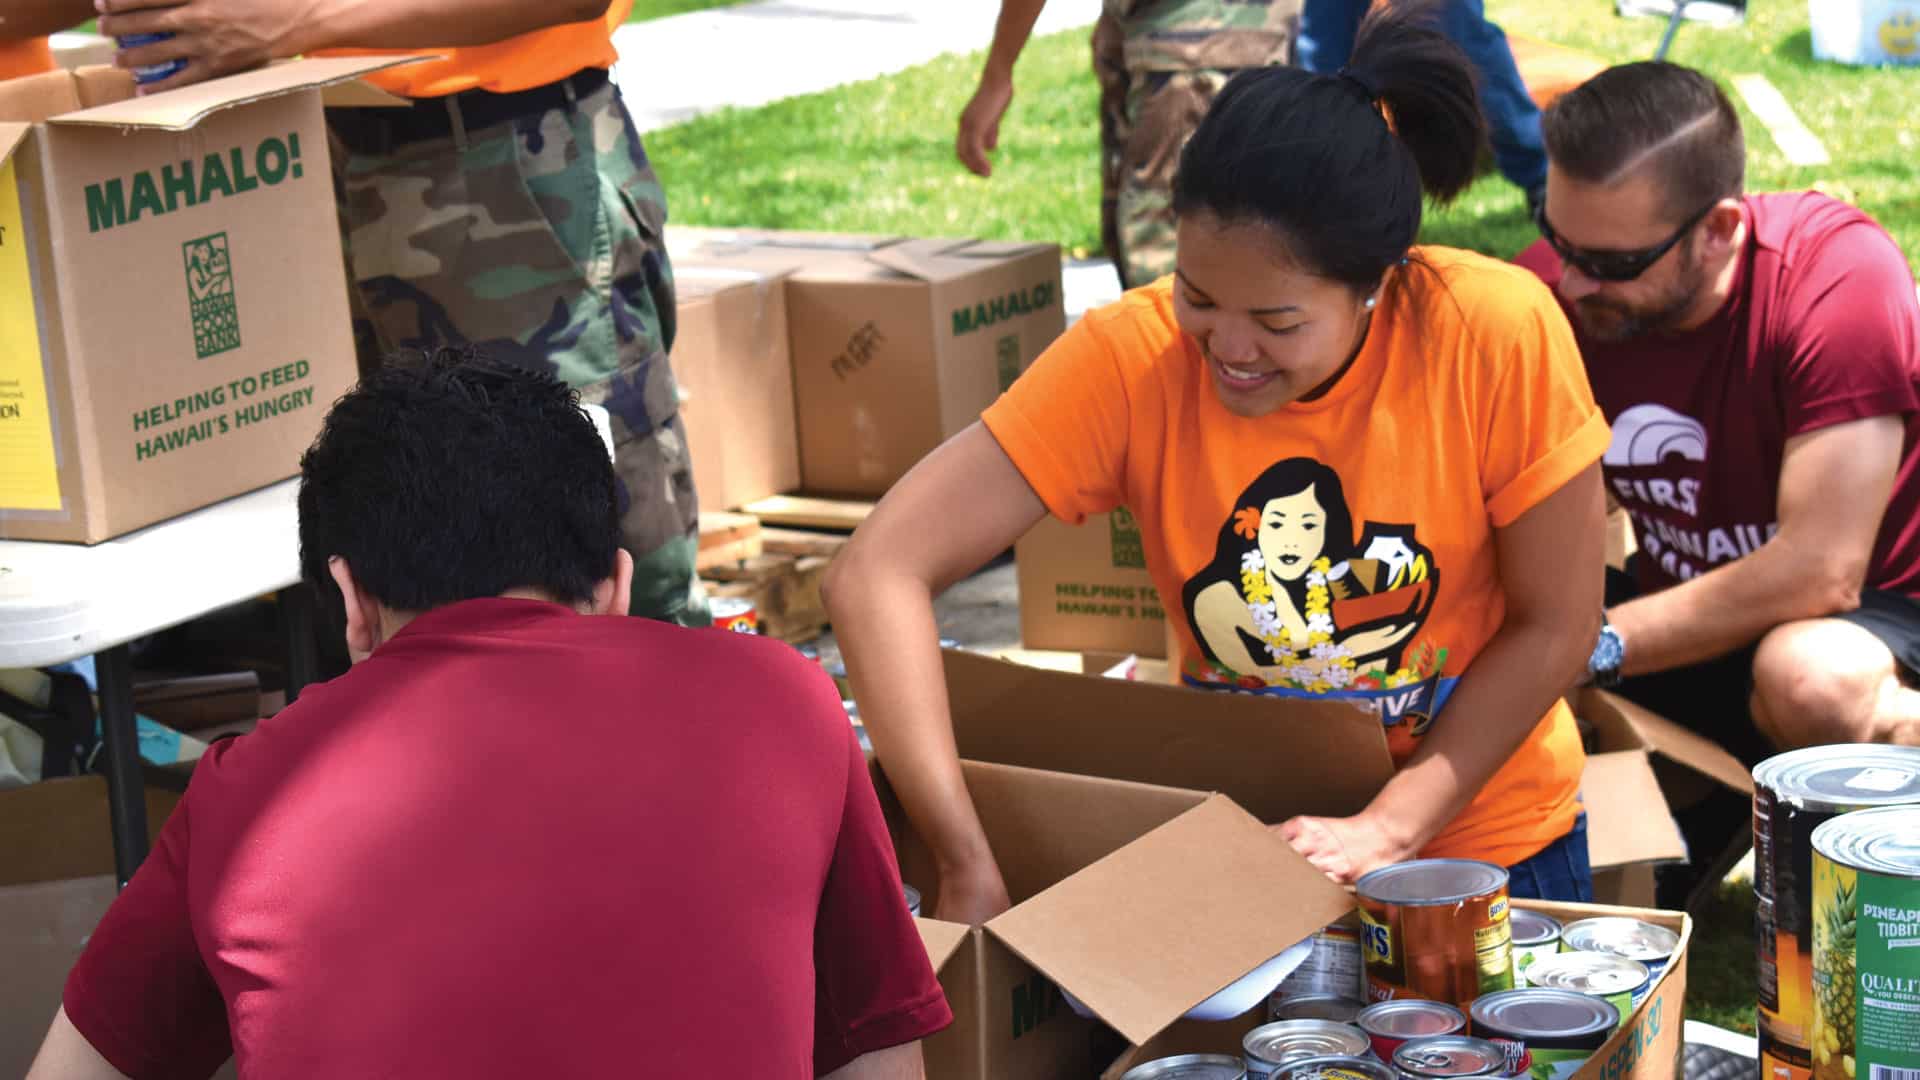 Volunteers in Oahu organizing a local food and fund drive to support Hawaii Foodbank’s mission.